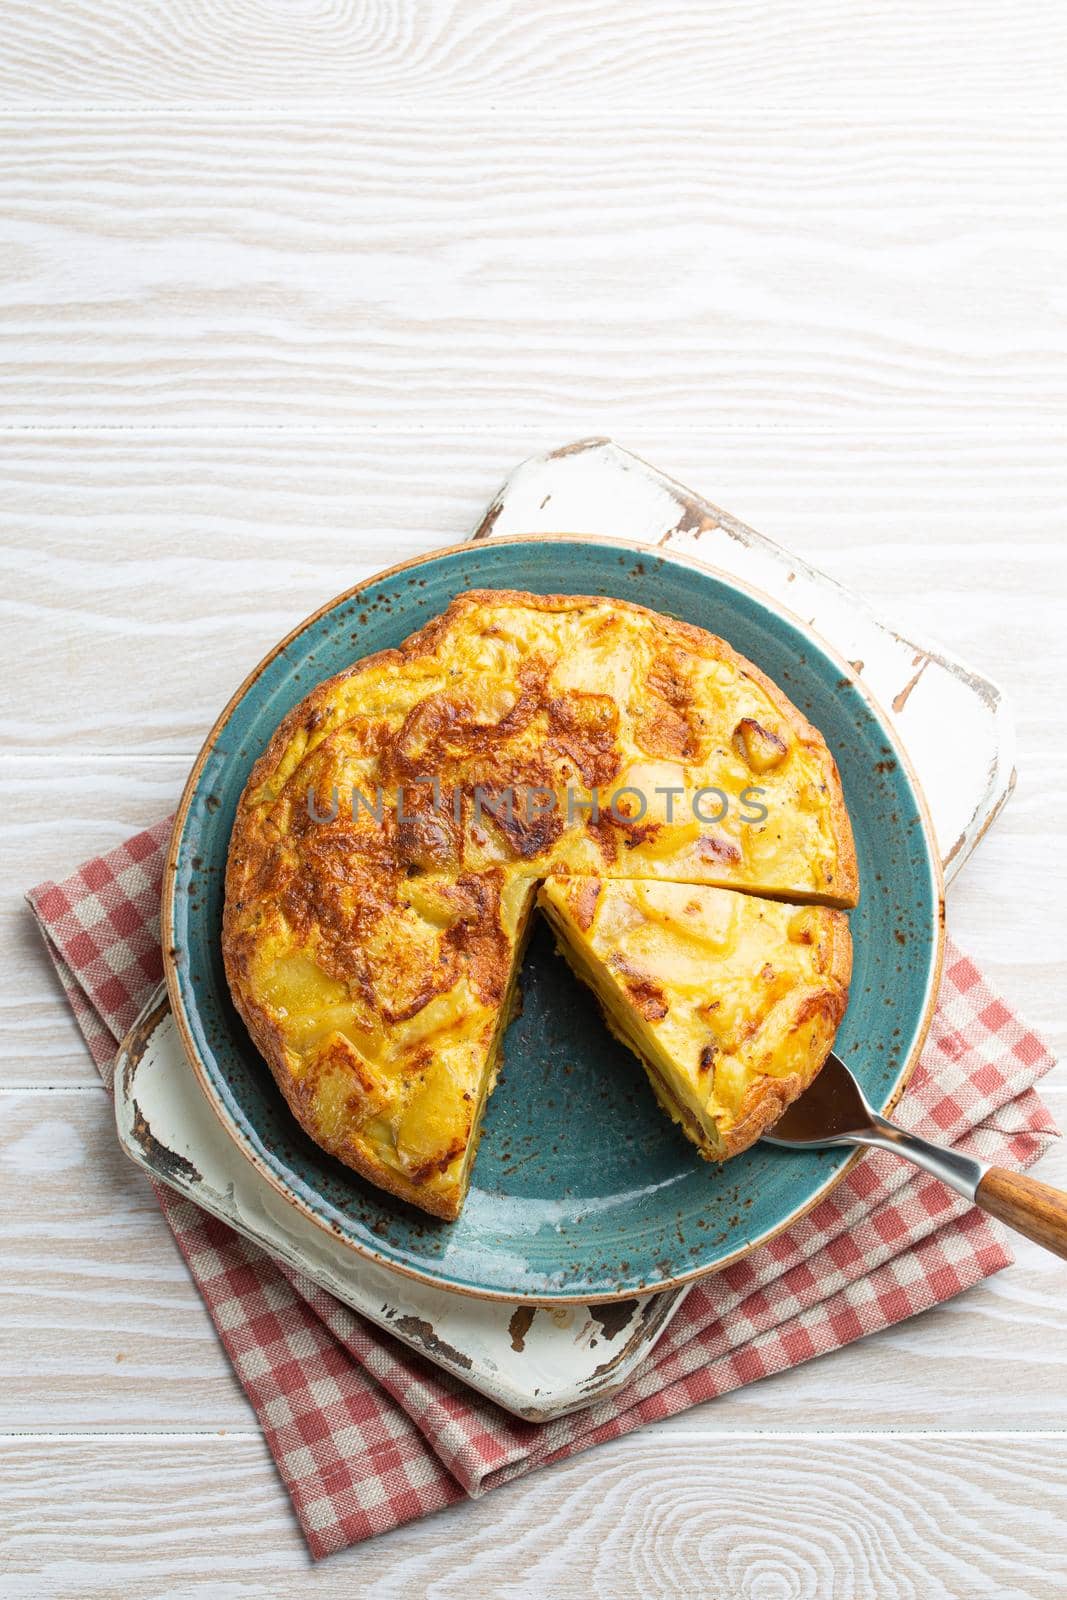 Spanish tortilla omelette with potatoes by its_al_dente